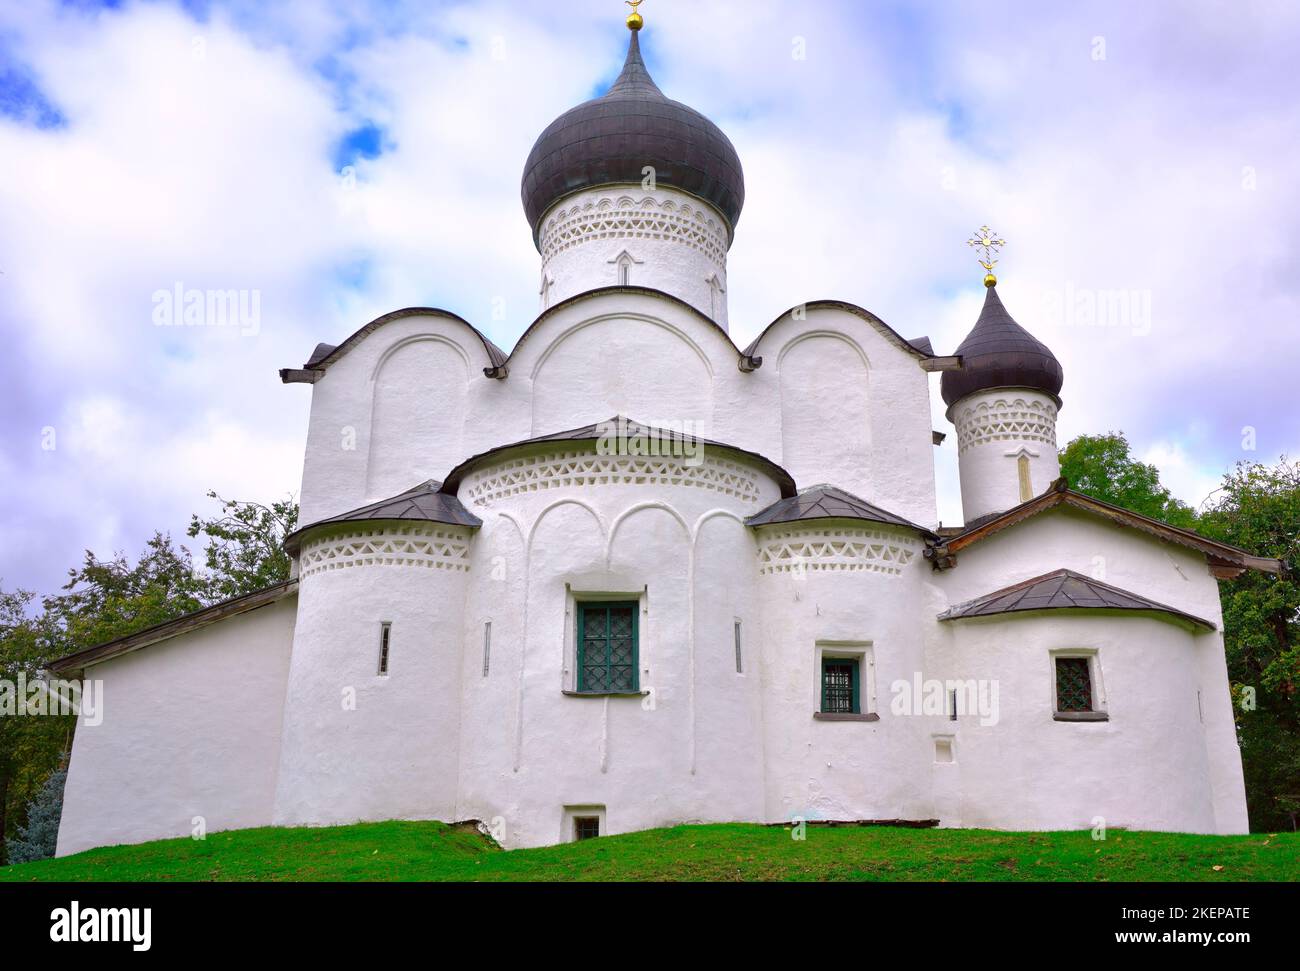 Churches in the Pskov style. The Church of St. Basil the Great on the Hill, a monument of Christian architecture of the XVI century. Pskov, Russia, 20 Stock Photo